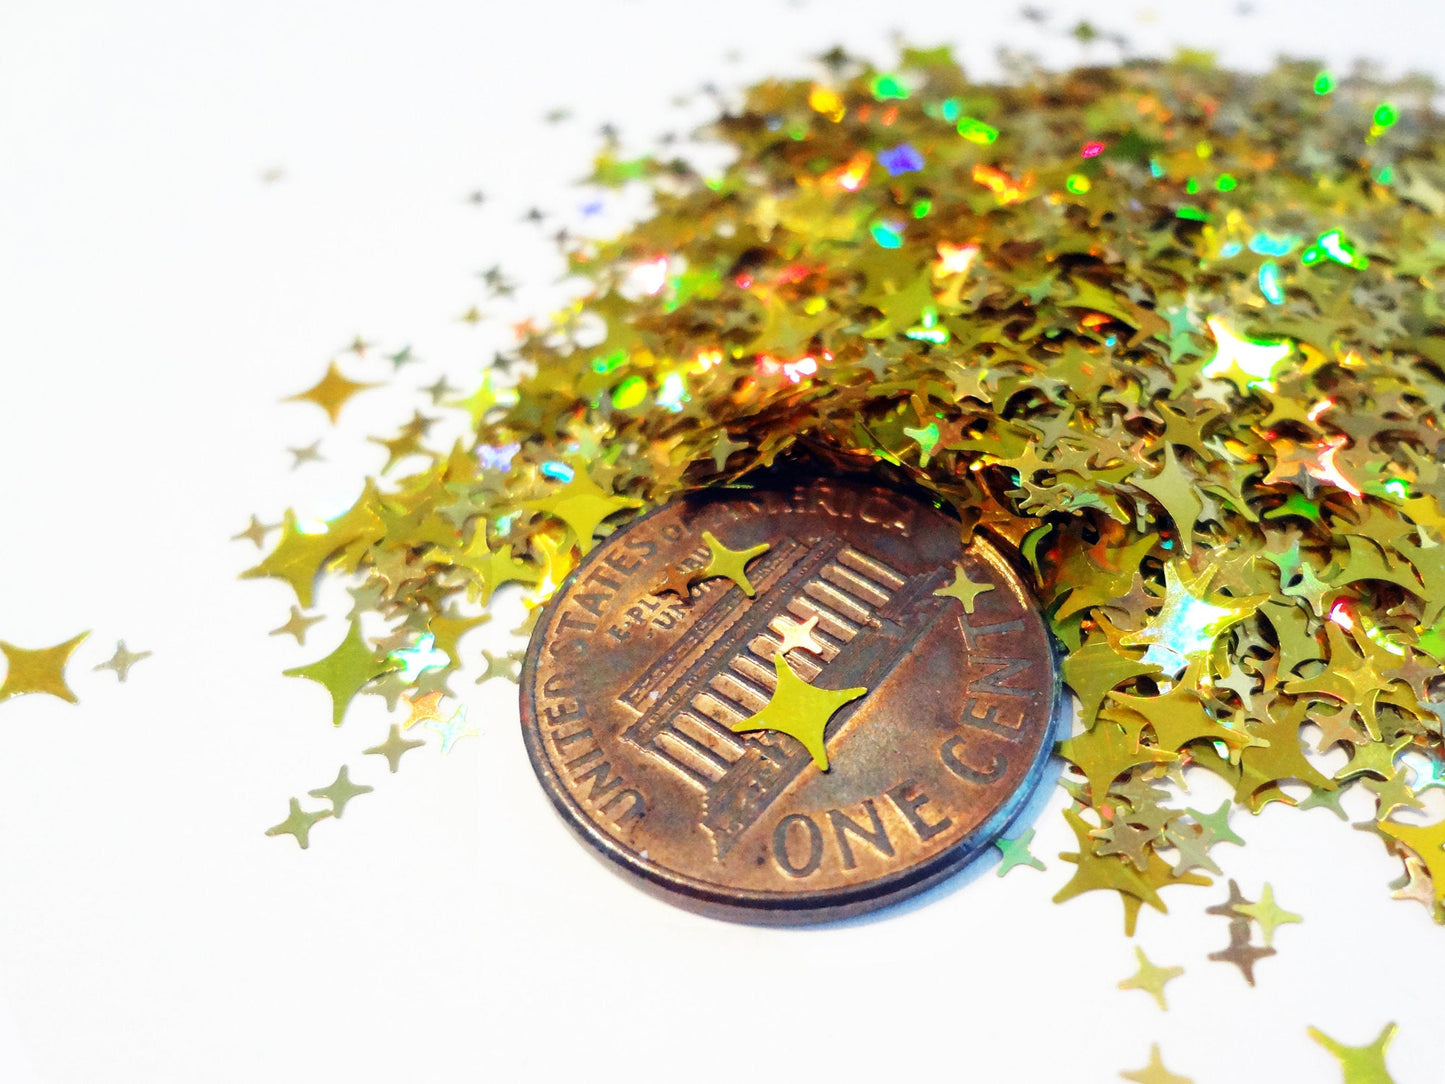 Holographic Gold Four Point Stars Glitter, 2mm, 4mm and 5mm mix, Solvent Resistant Glitter